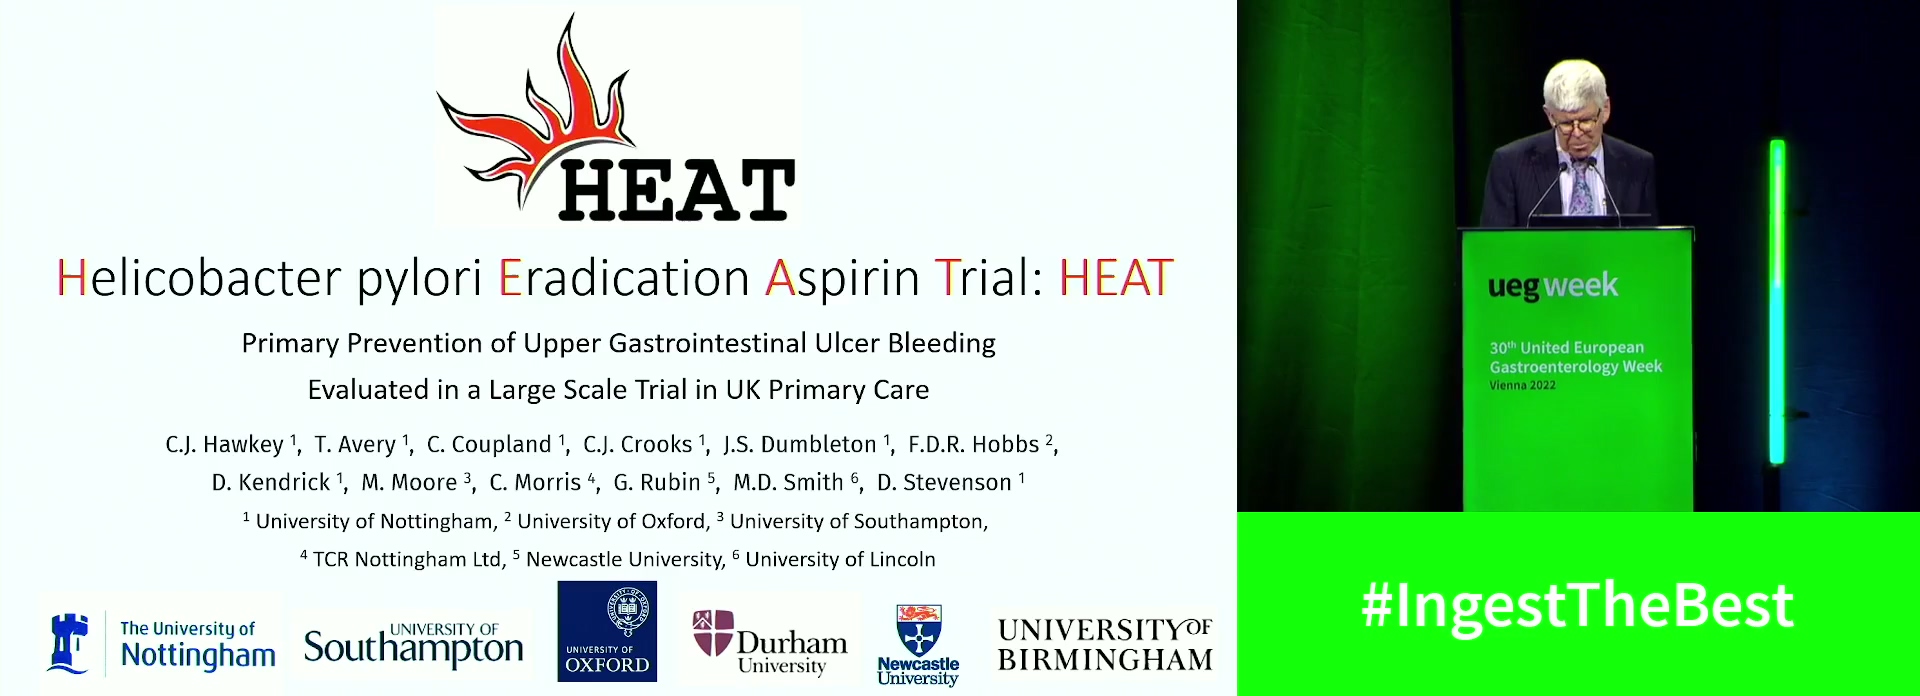 HELICOBACTER PYLORI ERADICATION ASPIRIN TRIAL (HEAT): PRIMARY PREVENTION OF UPPER GASTROINTESTINAL ULCER BLEEDING EVALUATED IN A LARGE SCALE TRIAL IN UK PRIMARY CARE